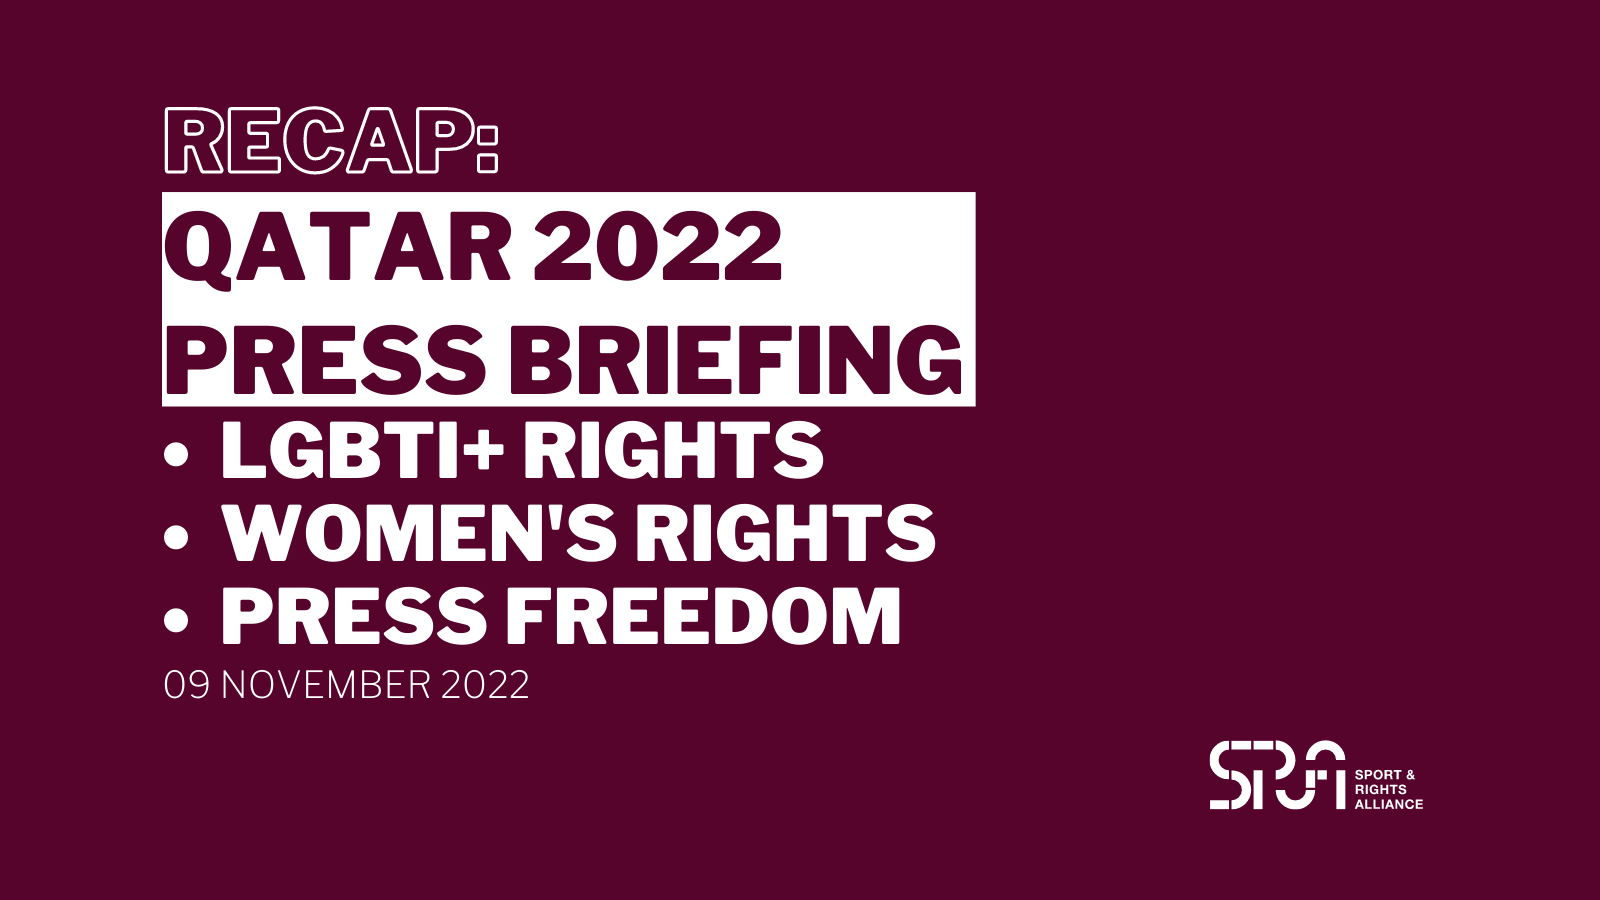 Image shows maroon background with SRA logo and headline: "Recap: Qatar 2022 Press Briefing" with bullet points "LGBTI+ rights, Women's rights, Press freedom" and date 09 November 2022 // 10-11 AM ET 4-5 PM CET